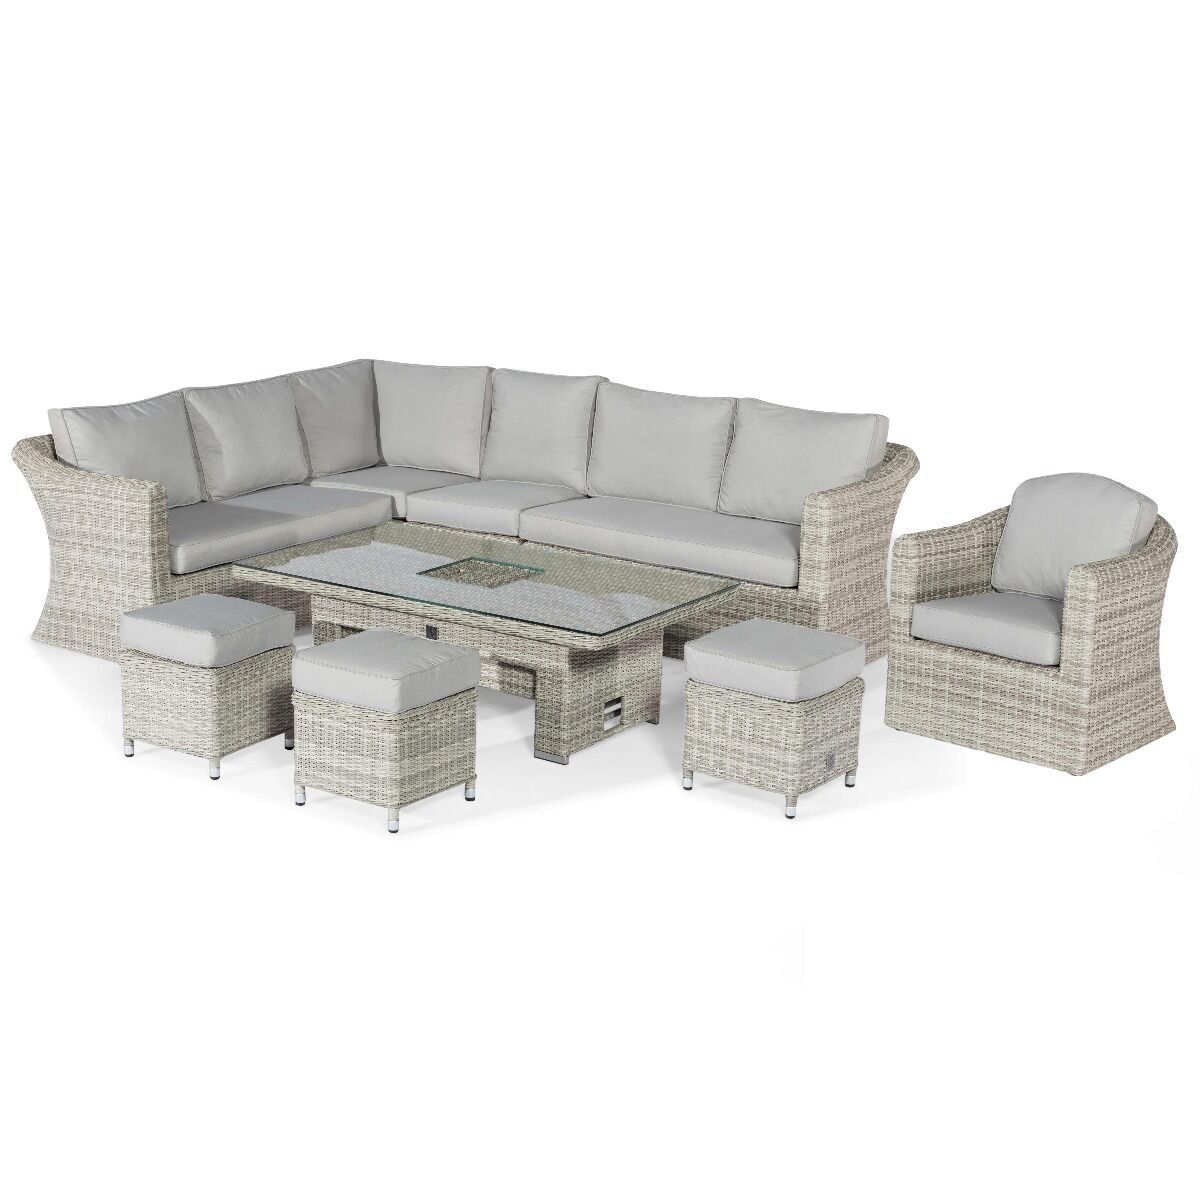 Maze - Oxford Deluxe Large Rattan Corner Dining Set with Rising Table & Armchair product image